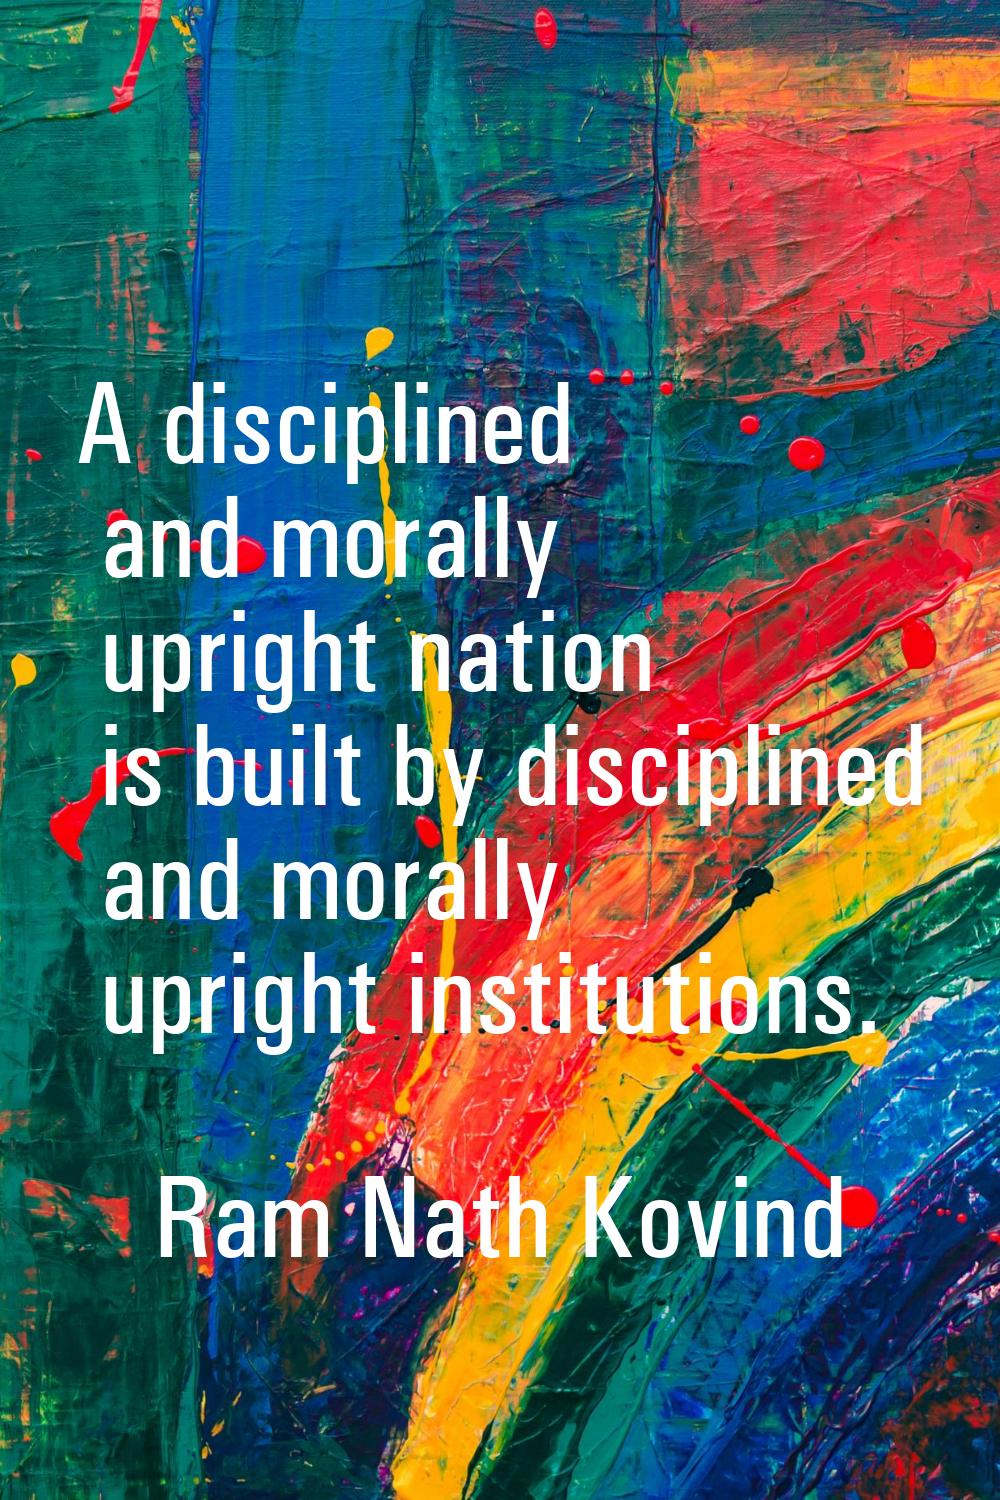 A disciplined and morally upright nation is built by disciplined and morally upright institutions.